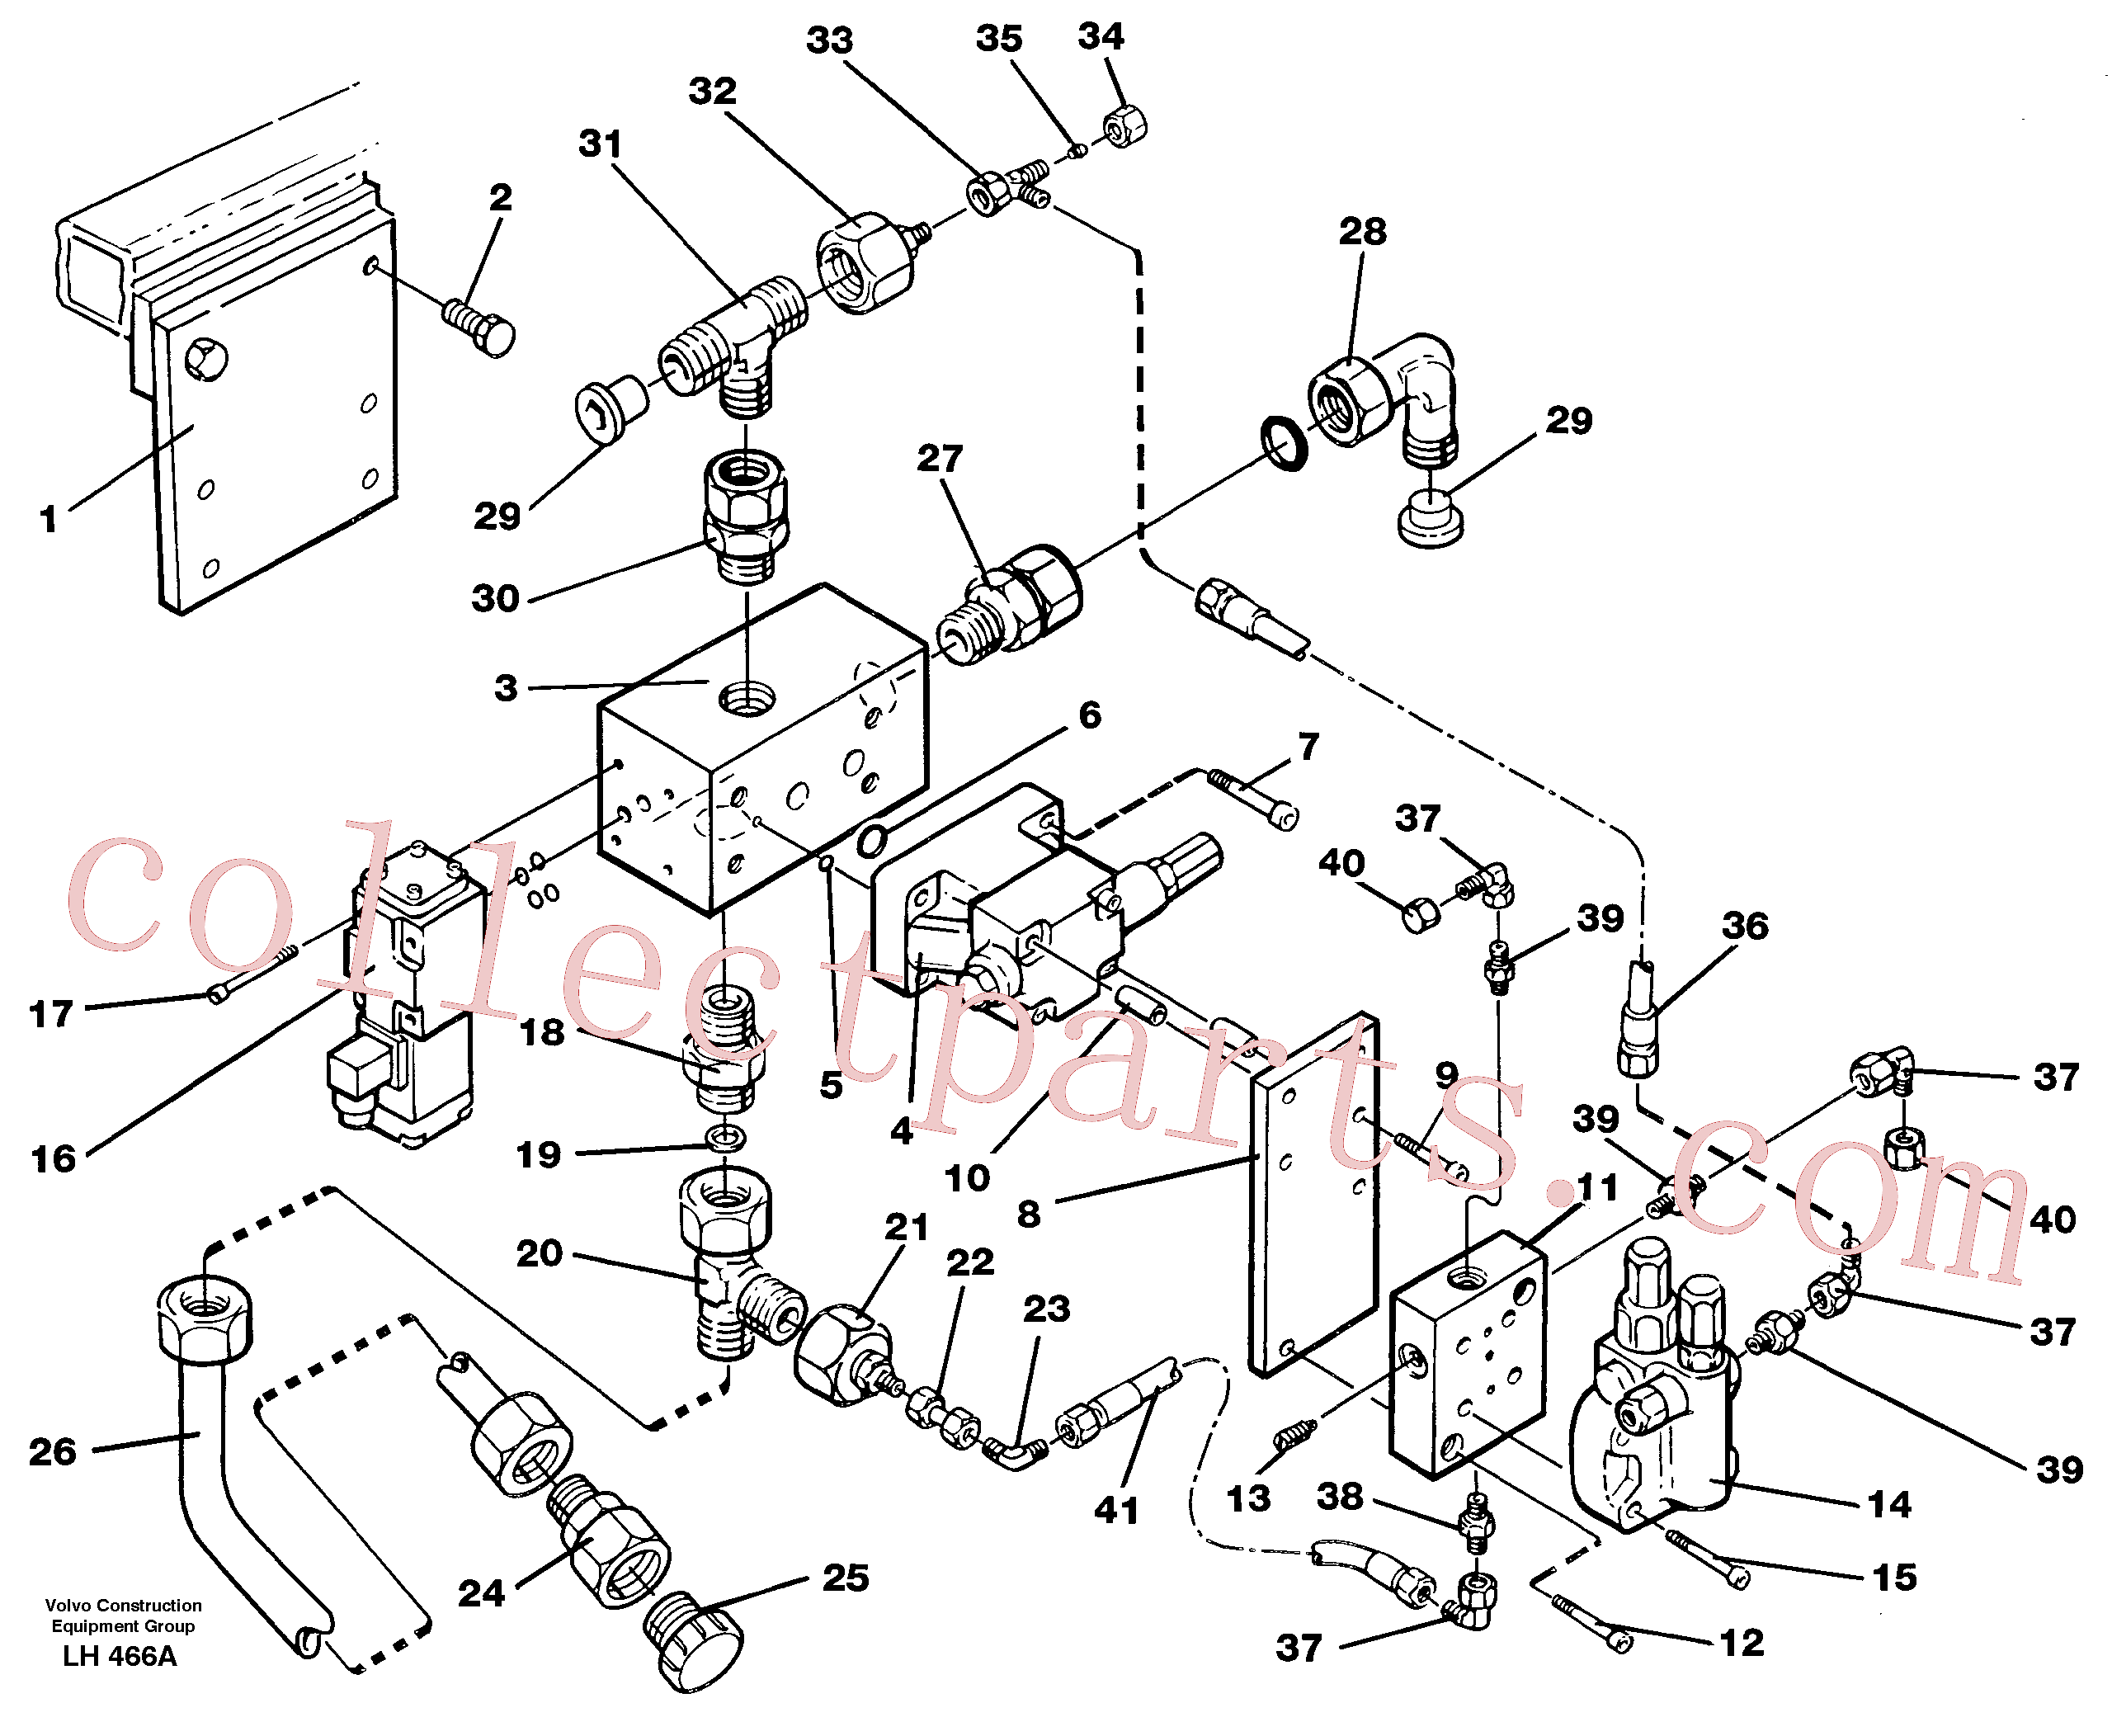 VOE14211065 for Volvo Magnet equipment, Älmhult, valve assembly(LH466A assembly)